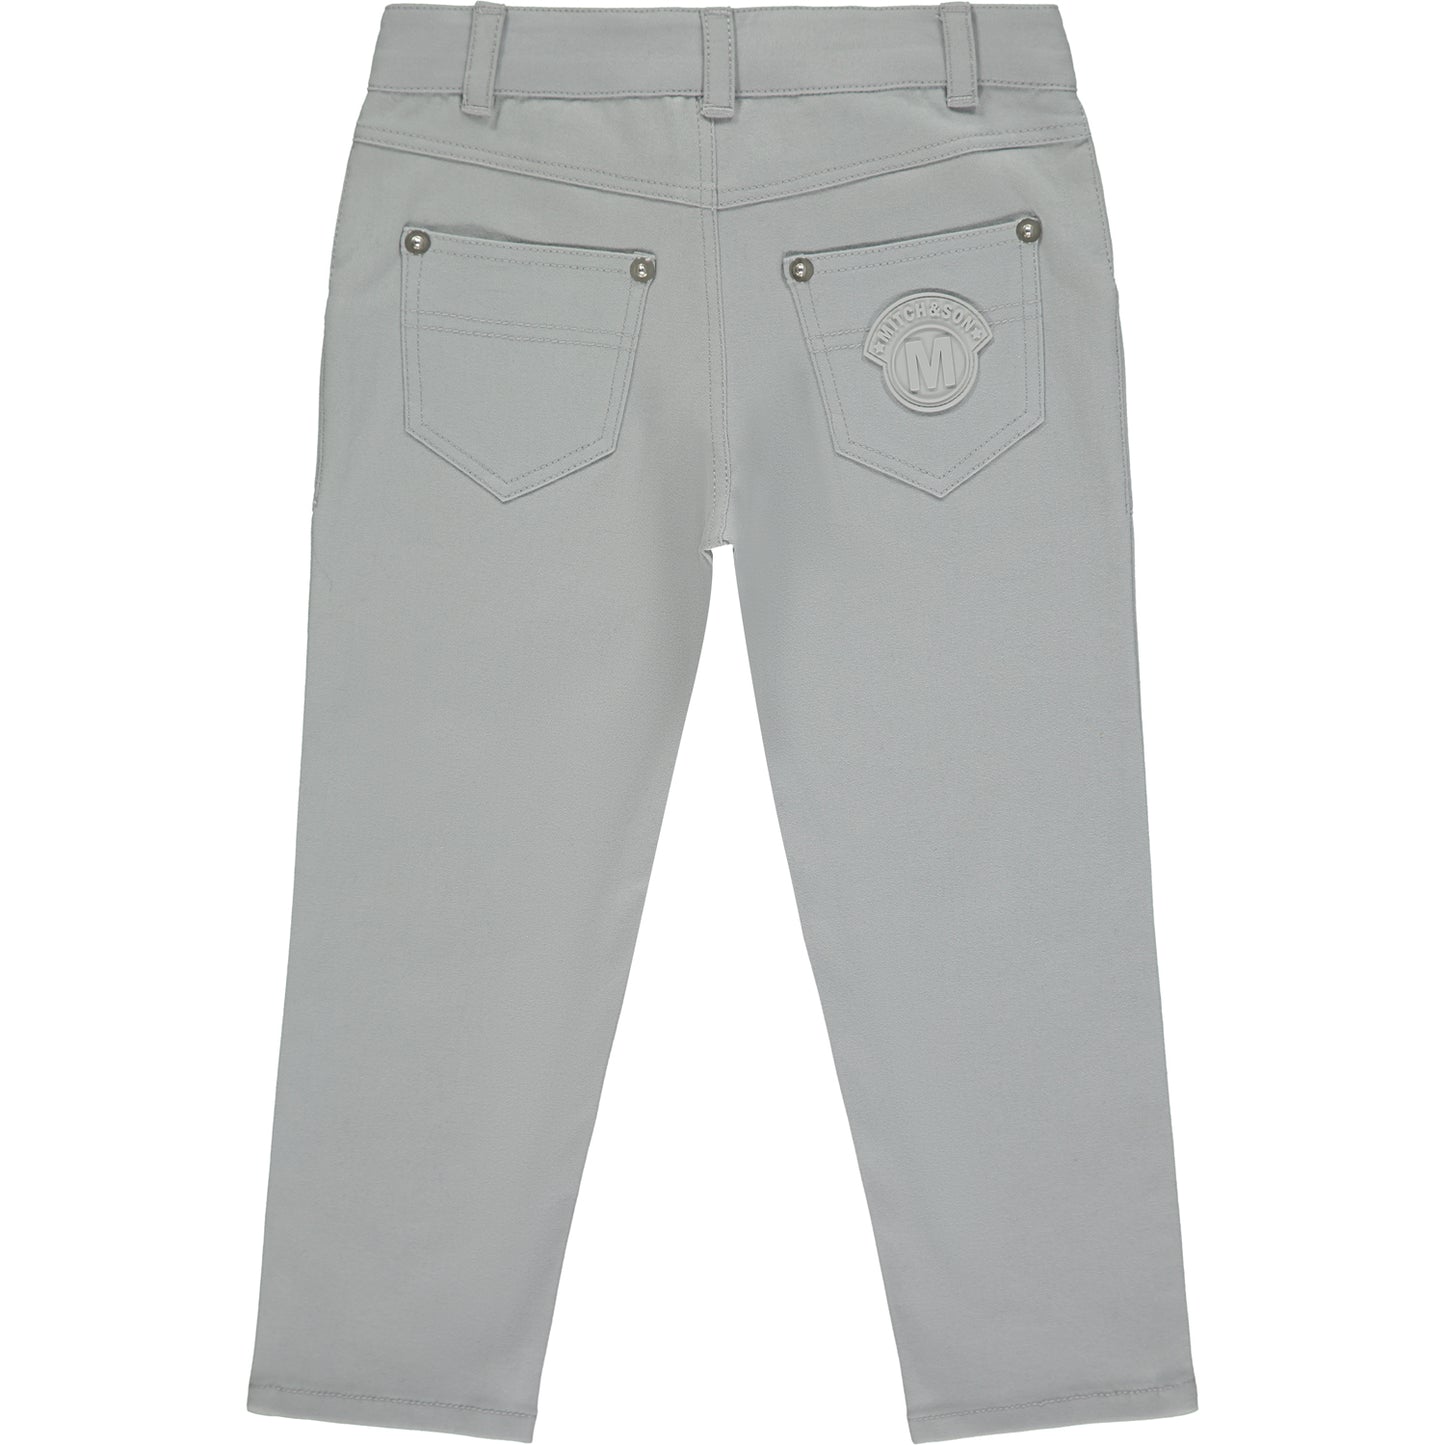 Boys Knitted Polo & Grey Chinos